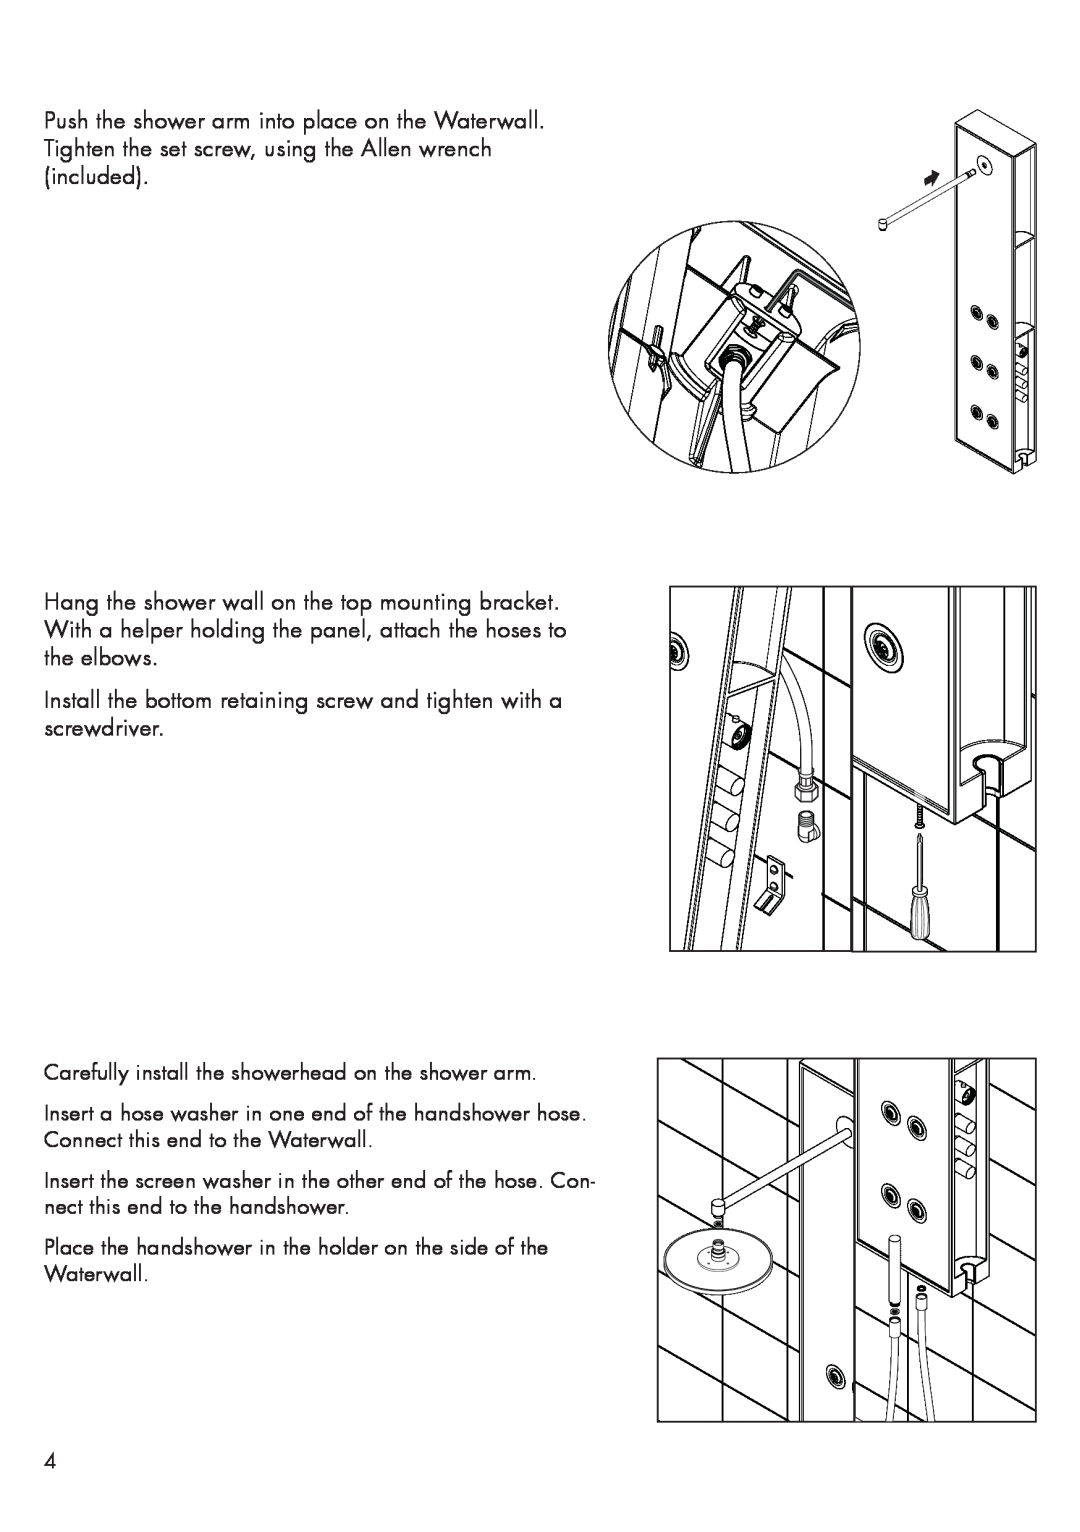 Axor 10920001 installation instructions Install the bottom retaining screw and tighten with a screwdriver 